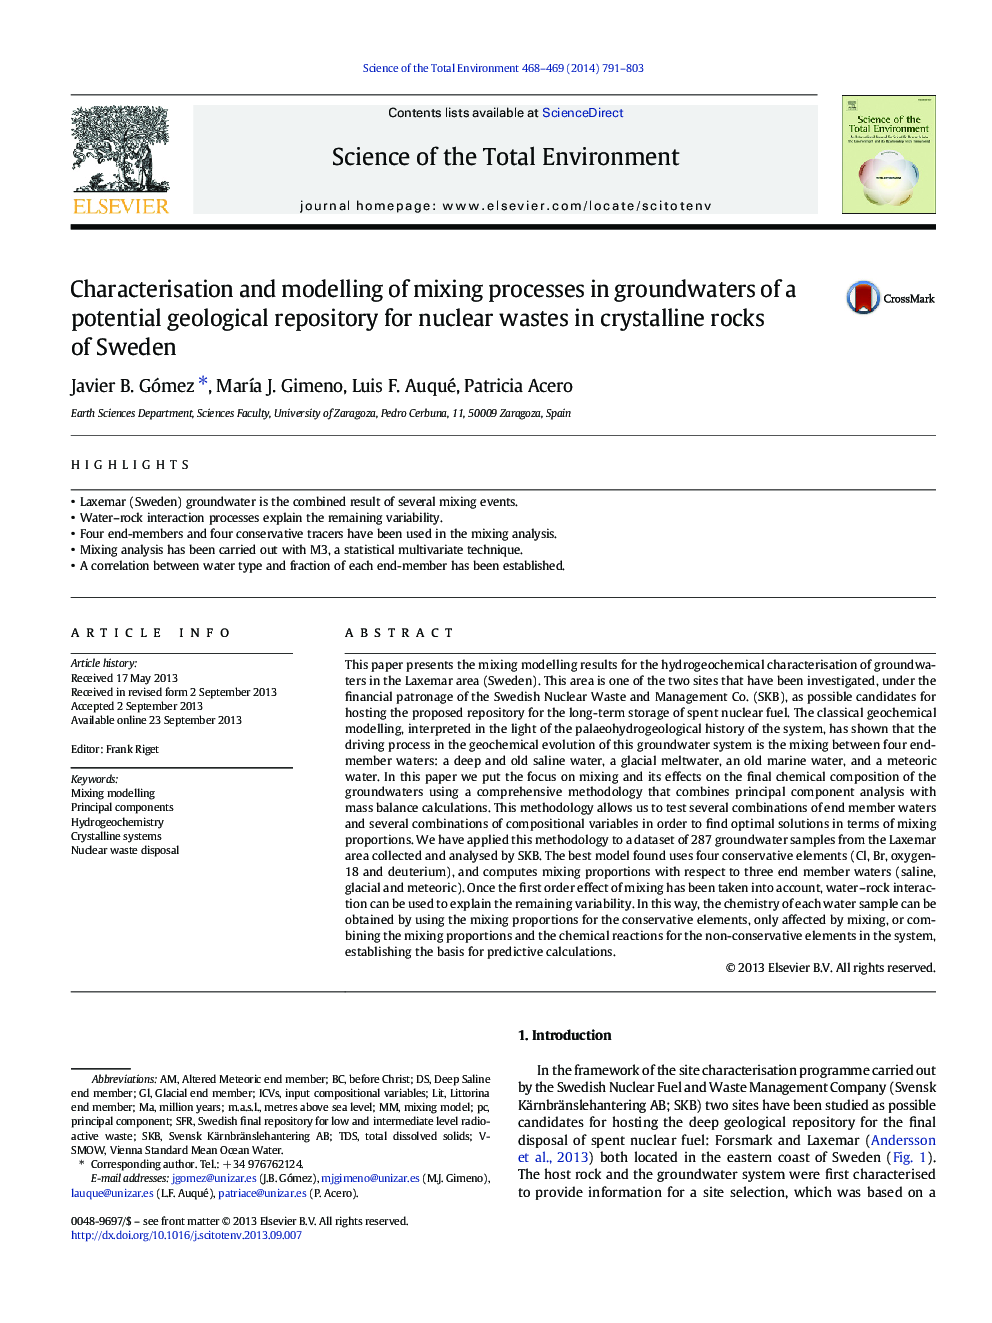 Characterisation and modelling of mixing processes in groundwaters of a potential geological repository for nuclear wastes in crystalline rocks of Sweden